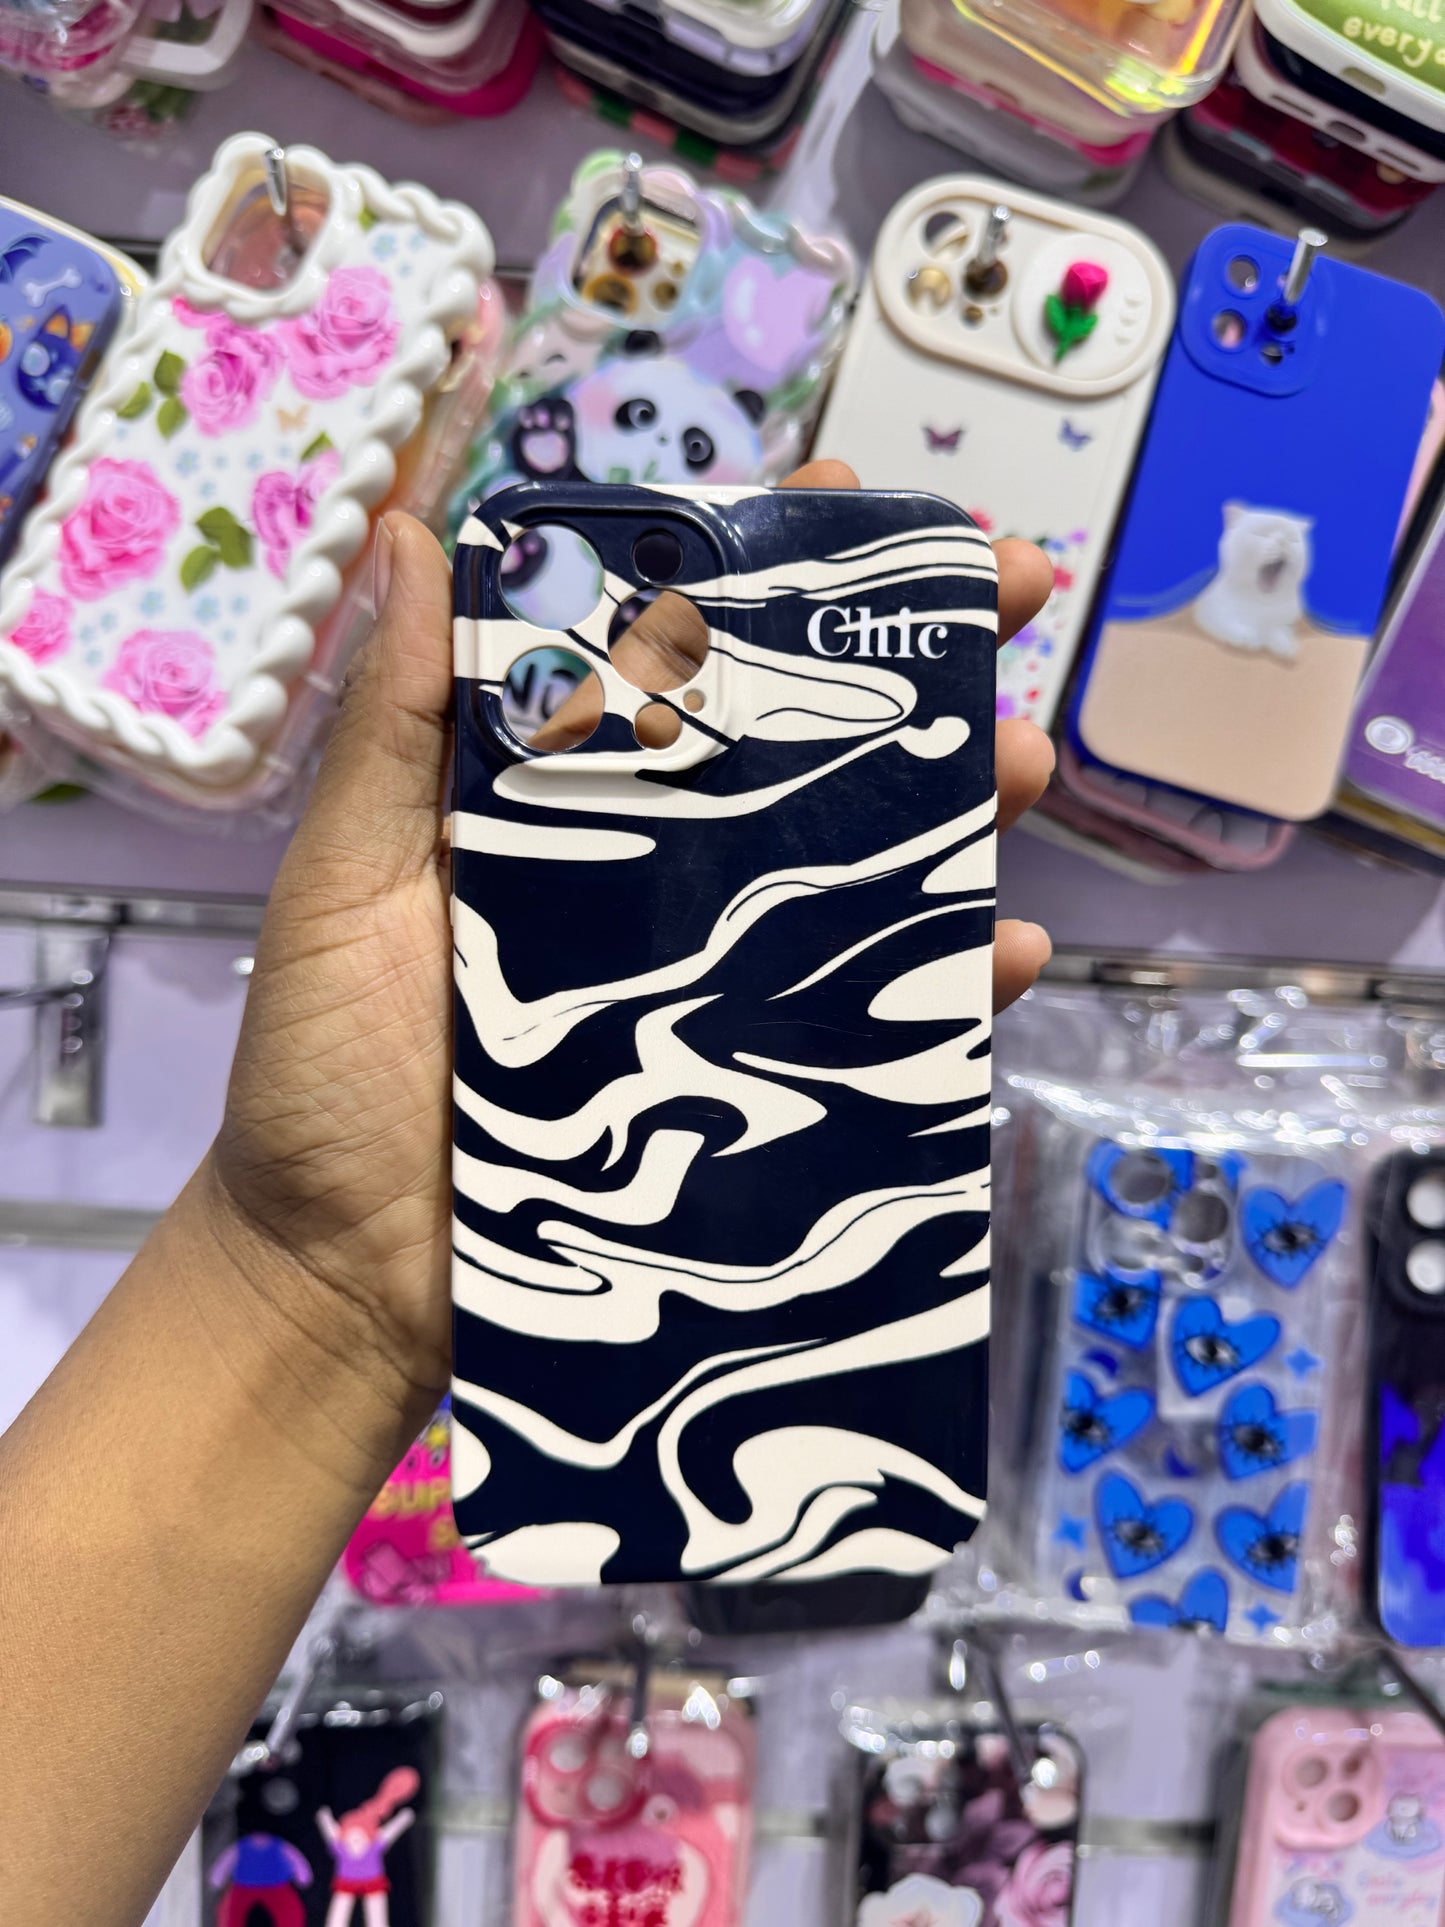 Chic Case For IPhones